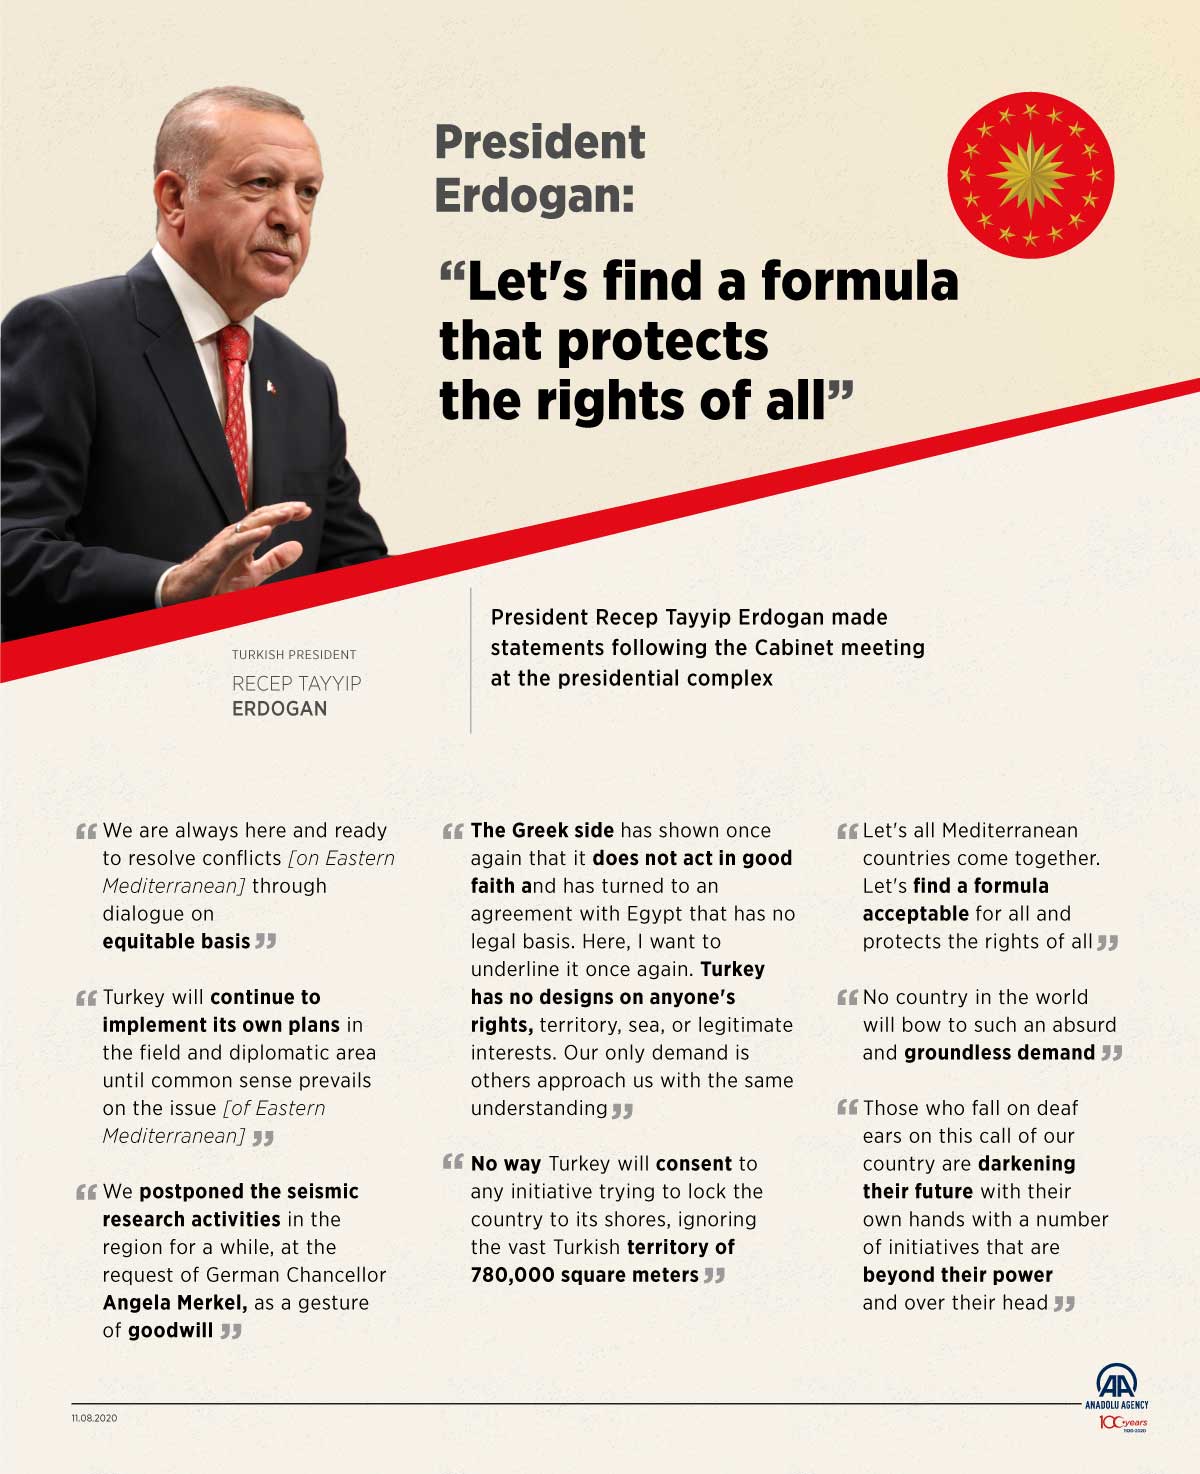 President Erdogan: "Let's find a formula that protects the rights of all"